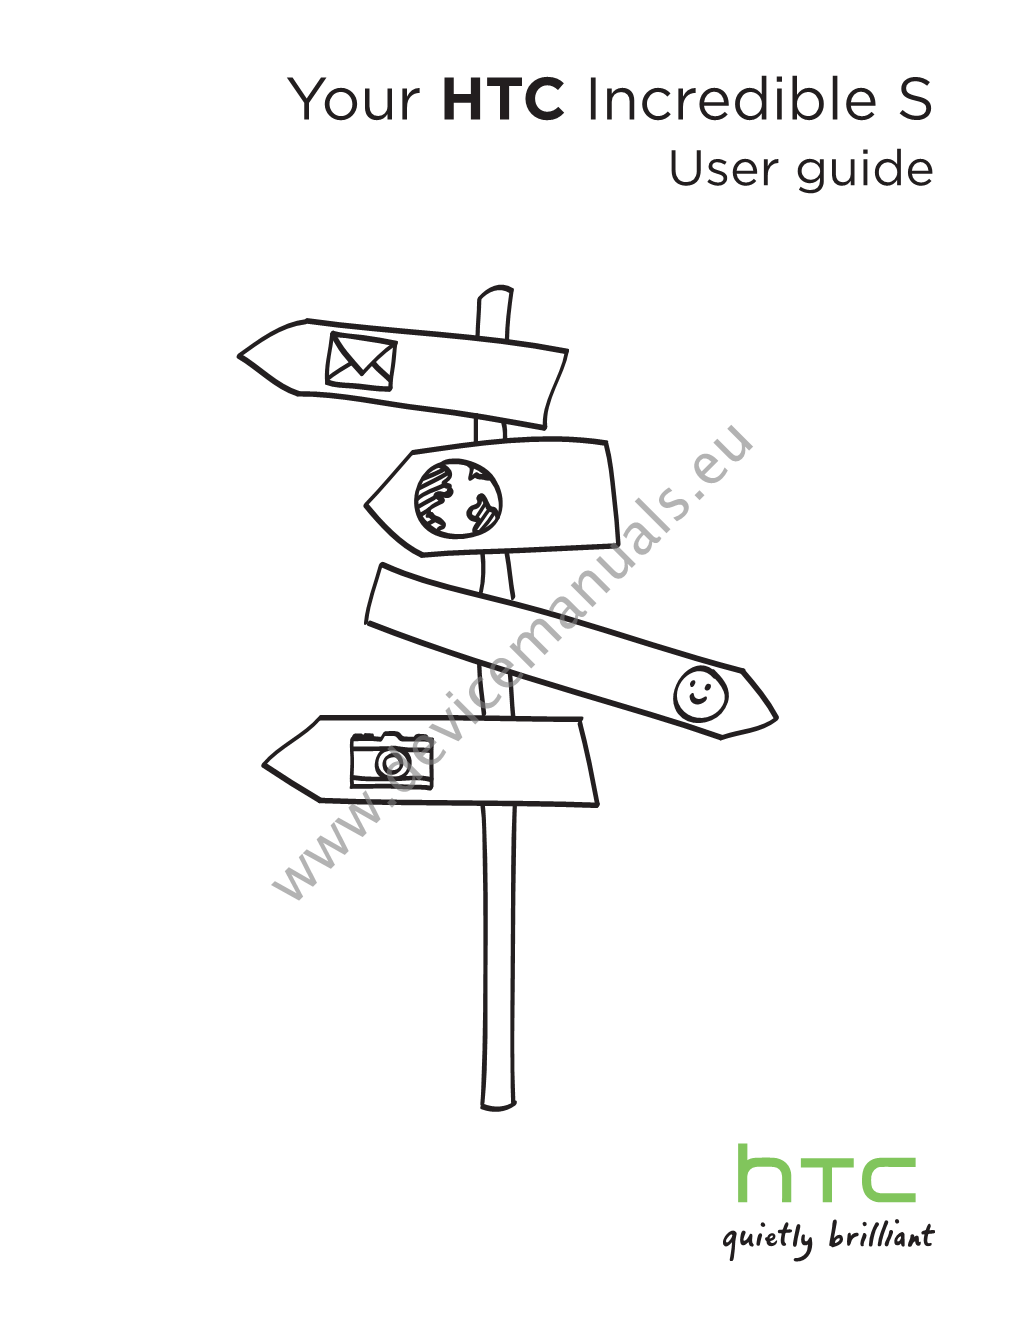 Your HTC Incredible S User Guide